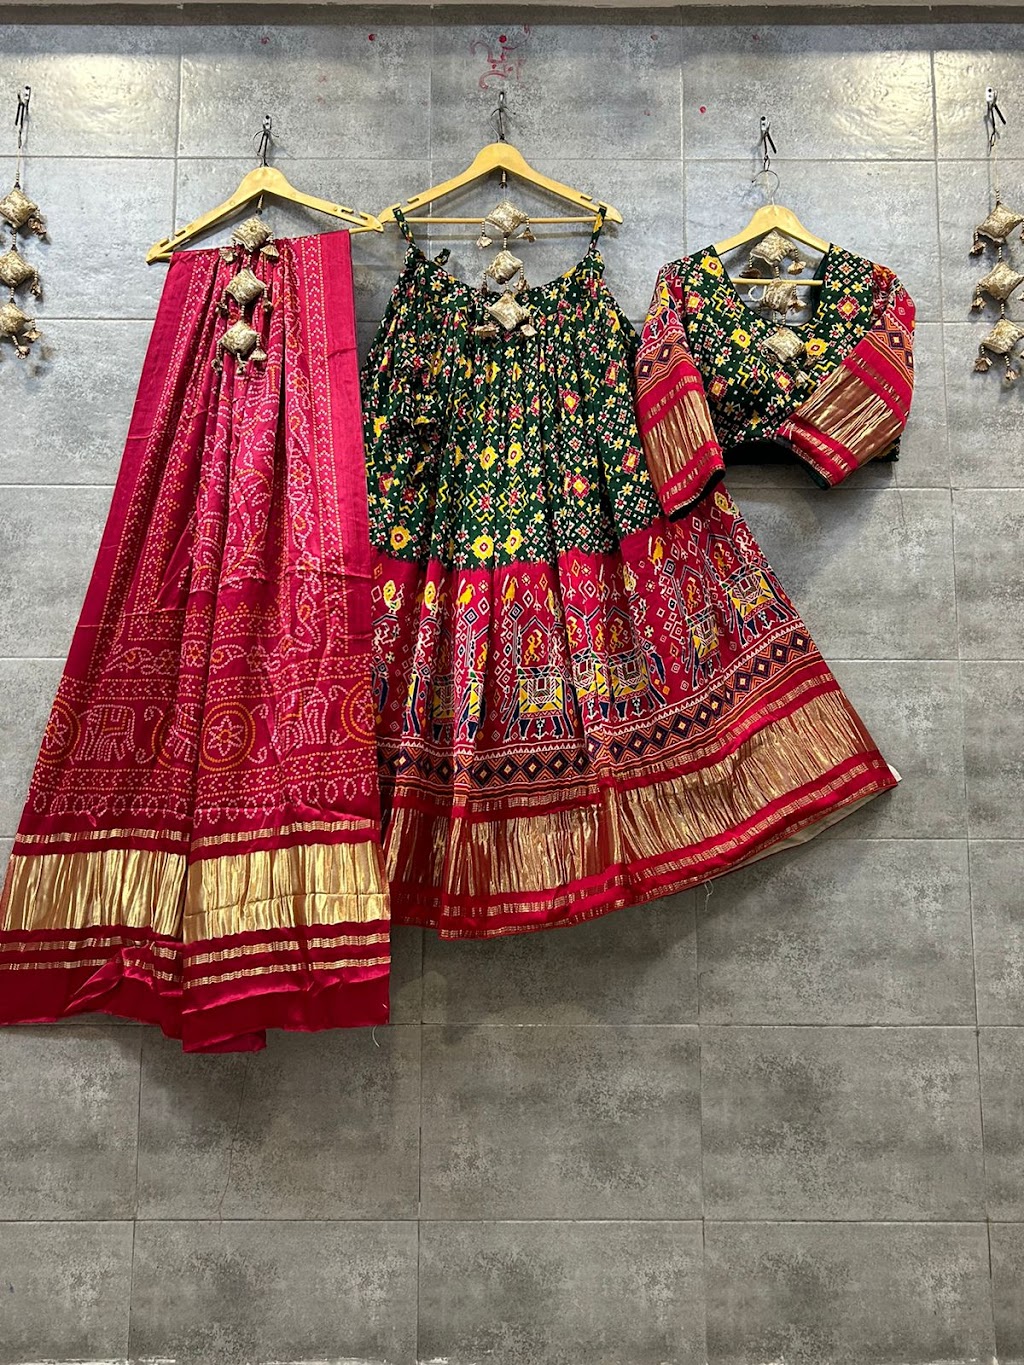 Wedding Shopping Services - Glamour Indian Wear | 2208 Michener St, Philadelphia, PA 19115 | Phone: (215) 341-9990